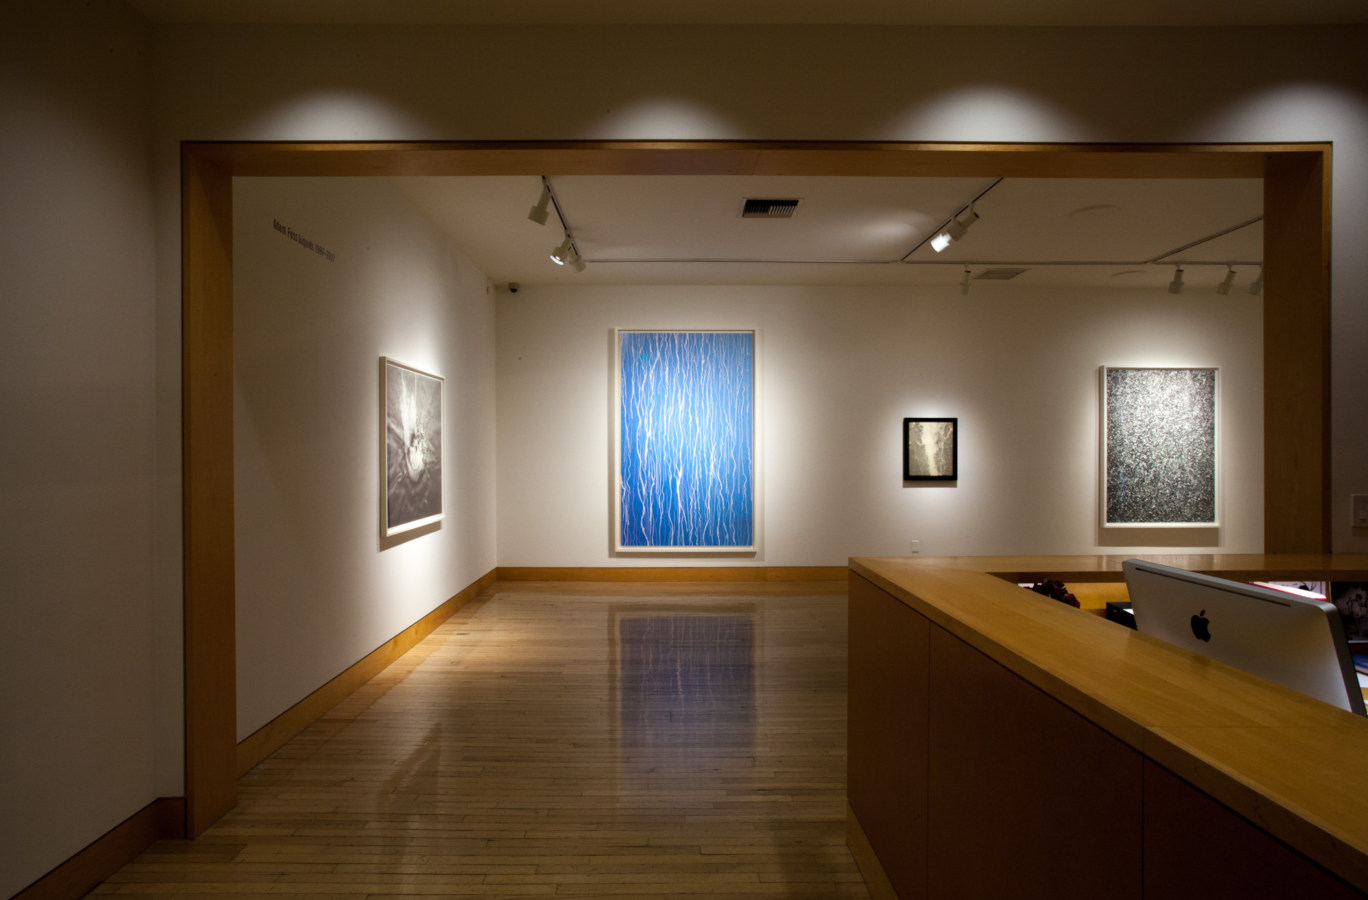 Color image of gallery entryway exhibiting large scale color photographs on white gallery walls